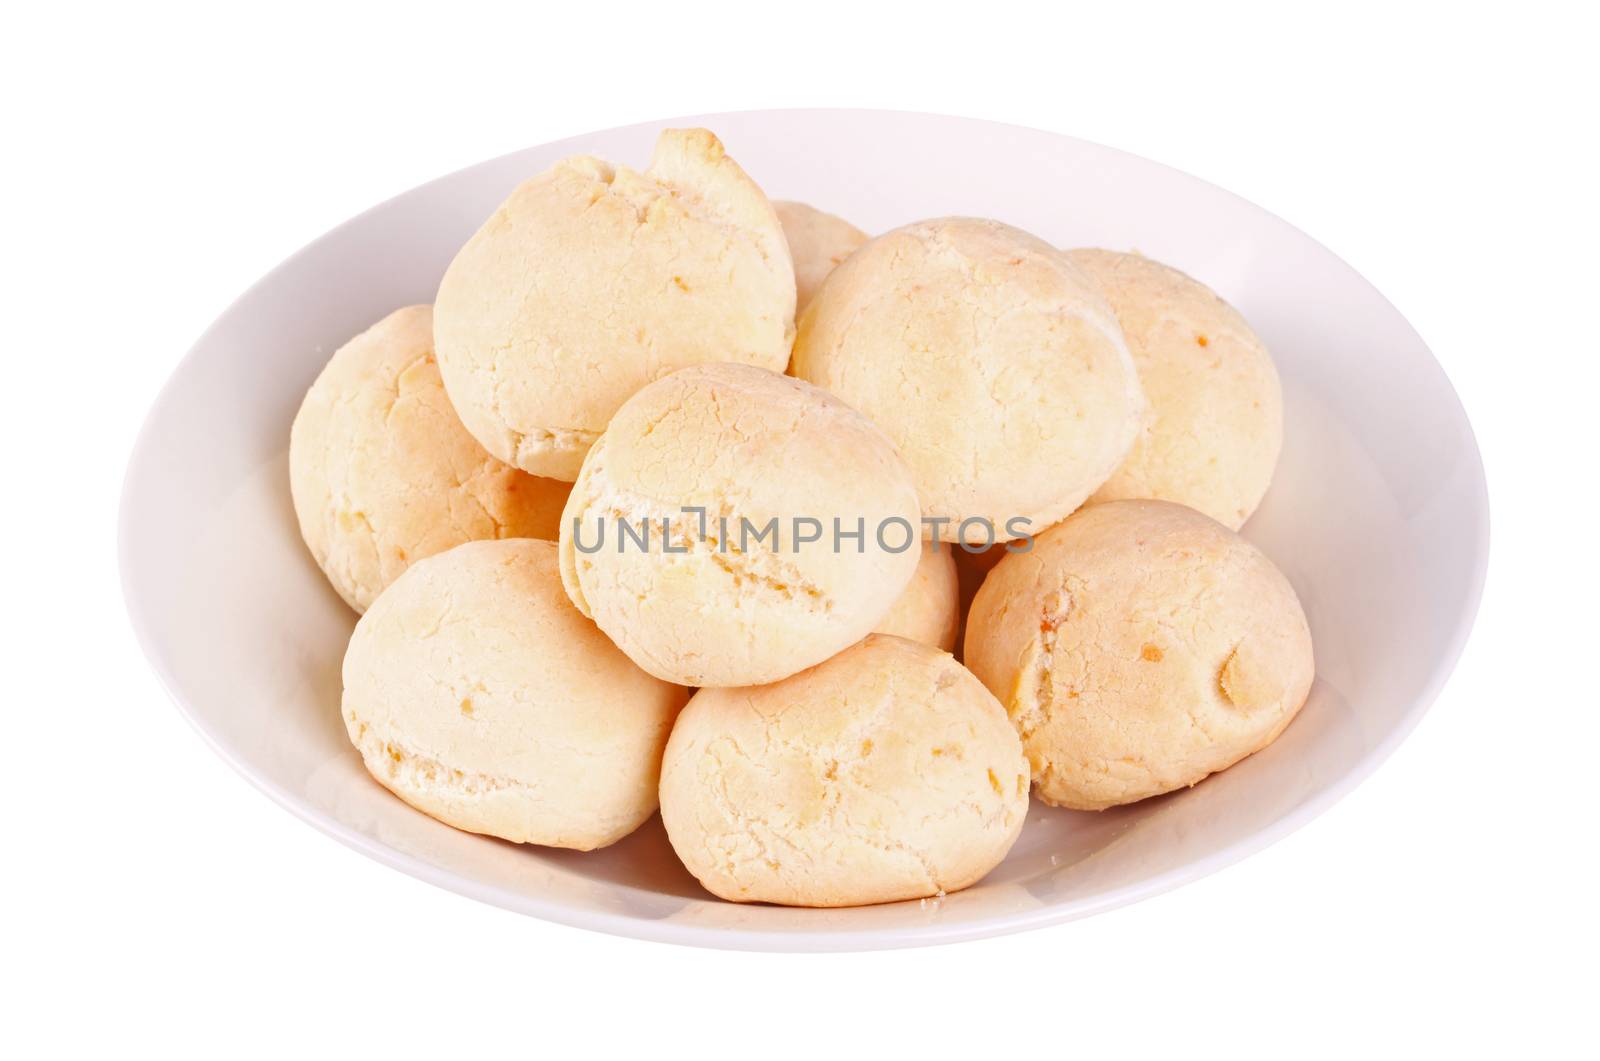 Closeup of several rolls of pan de yuca, the cheese bread made of tapioca (or yuca) flour that is very popular in Ecuador, also known as pandebono in Colombia or pao de queijo in Brazil, on a white dish